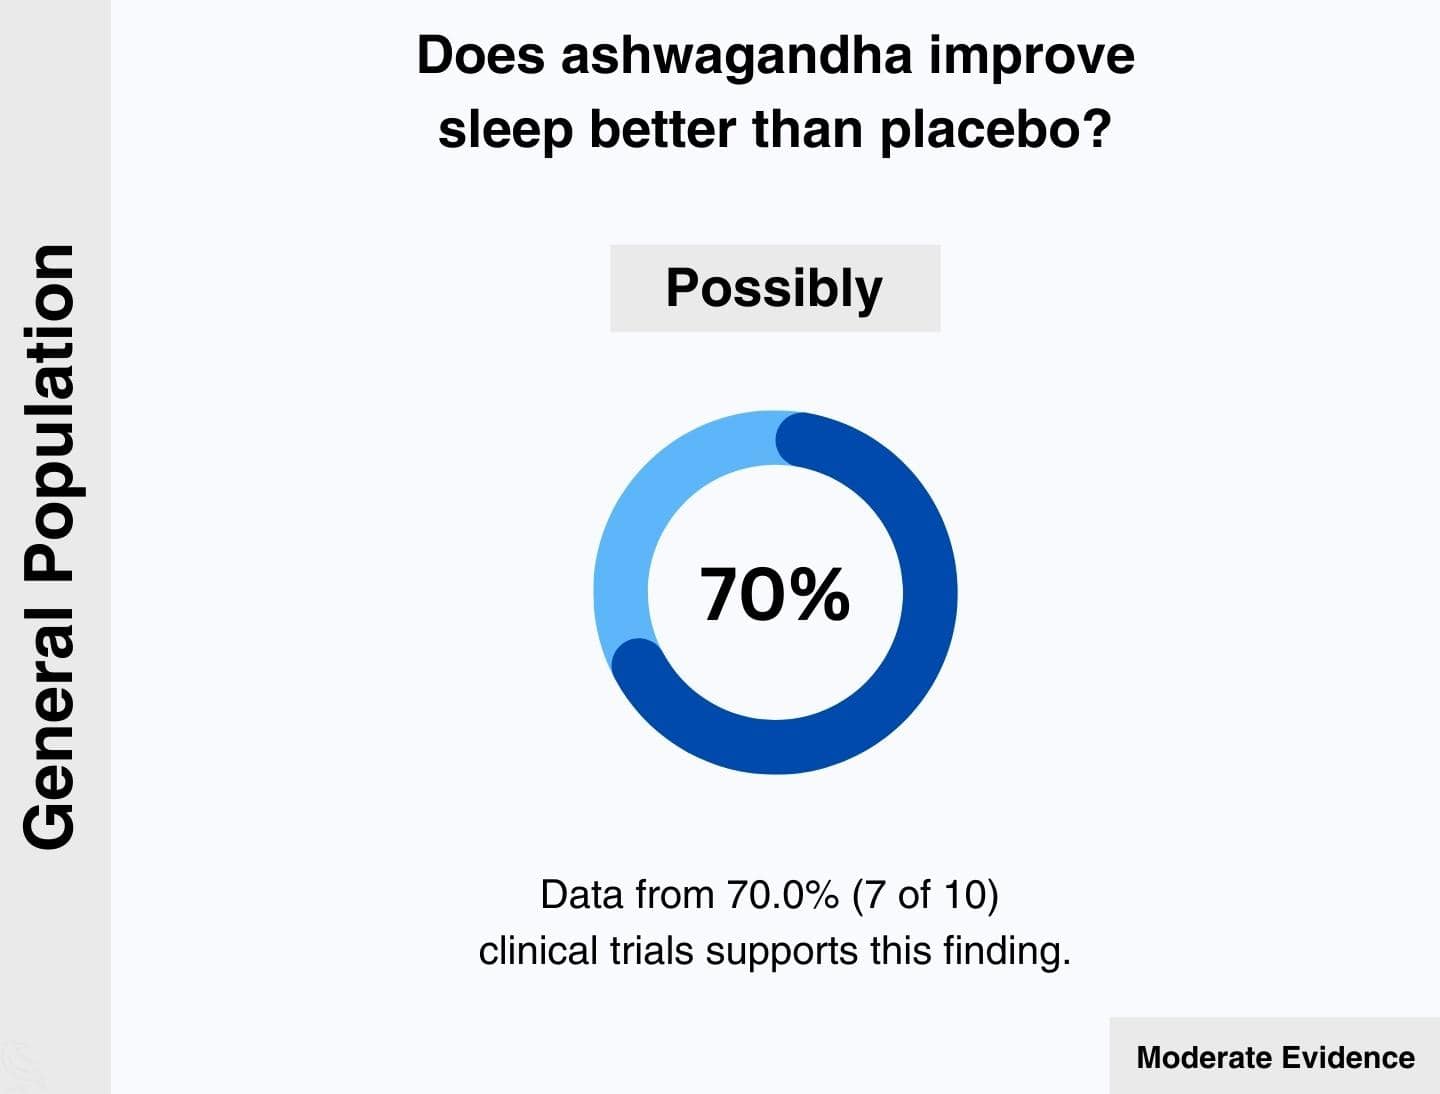 This image shows that 70.0% (7 of 10) clinical trials found that ashwagandha might improve sleep quality significantly better than placebo in adults in the general population.